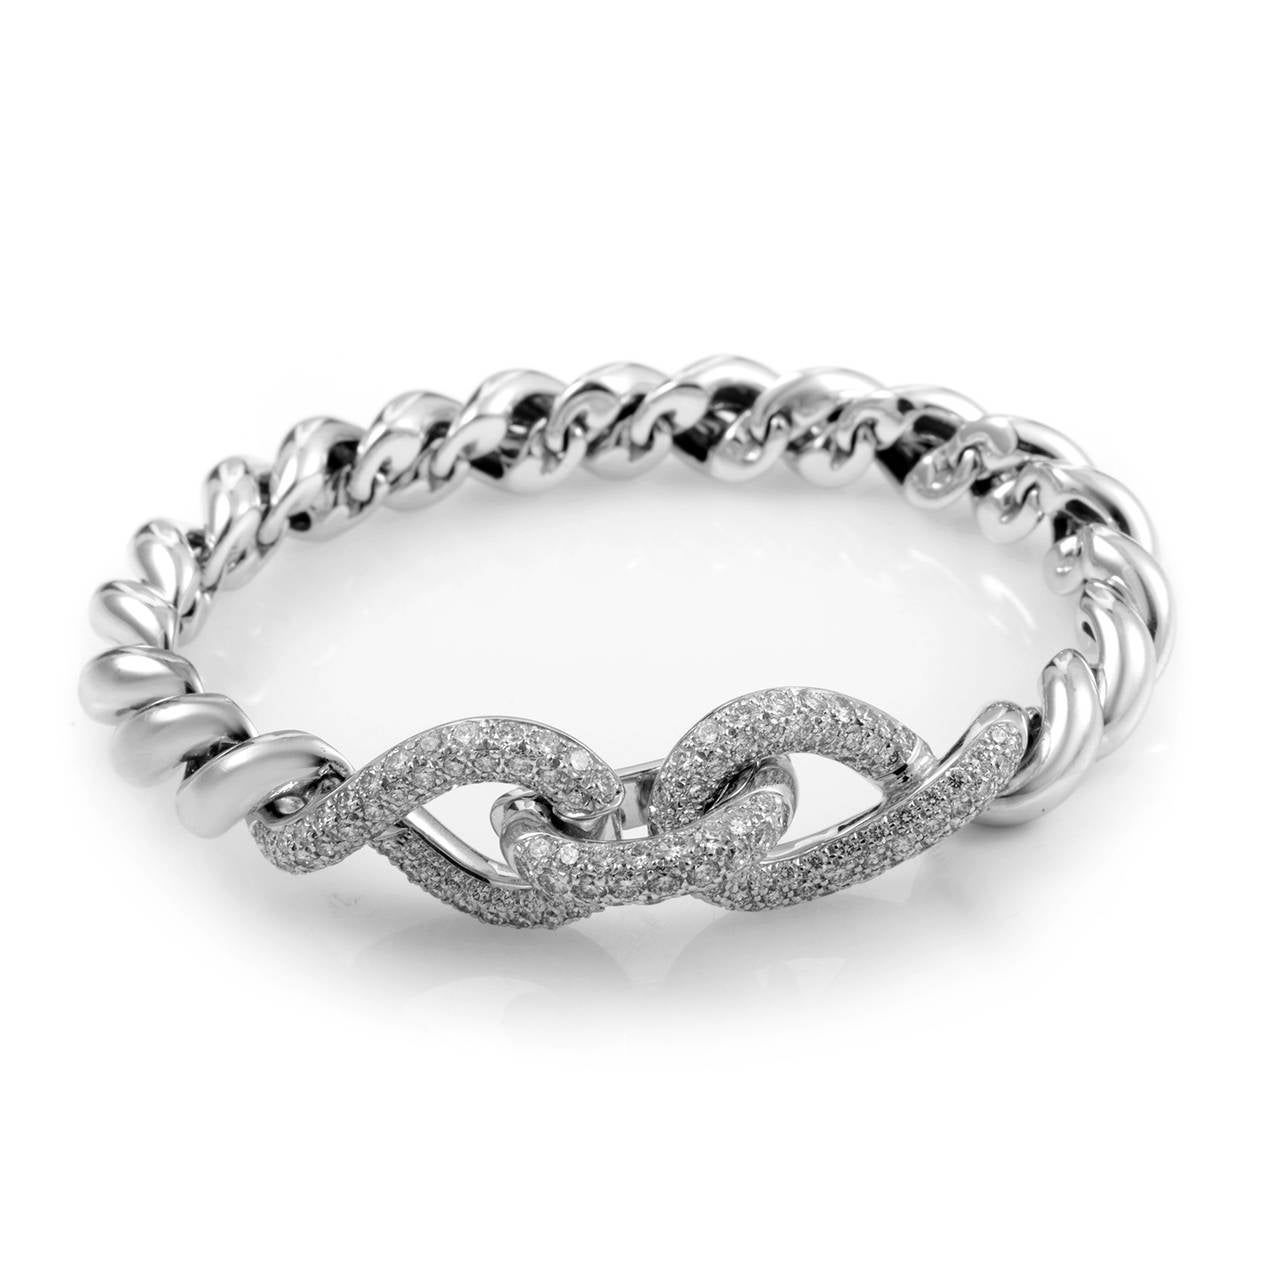 This bracelet boasts a classic design perfect for the lady who enjoys elegant luxuries. The bracelet is made of 18K white gold and boasts an integrated clasp set with a pave of white diamonds.

Diamond Carat Weight: 3.00